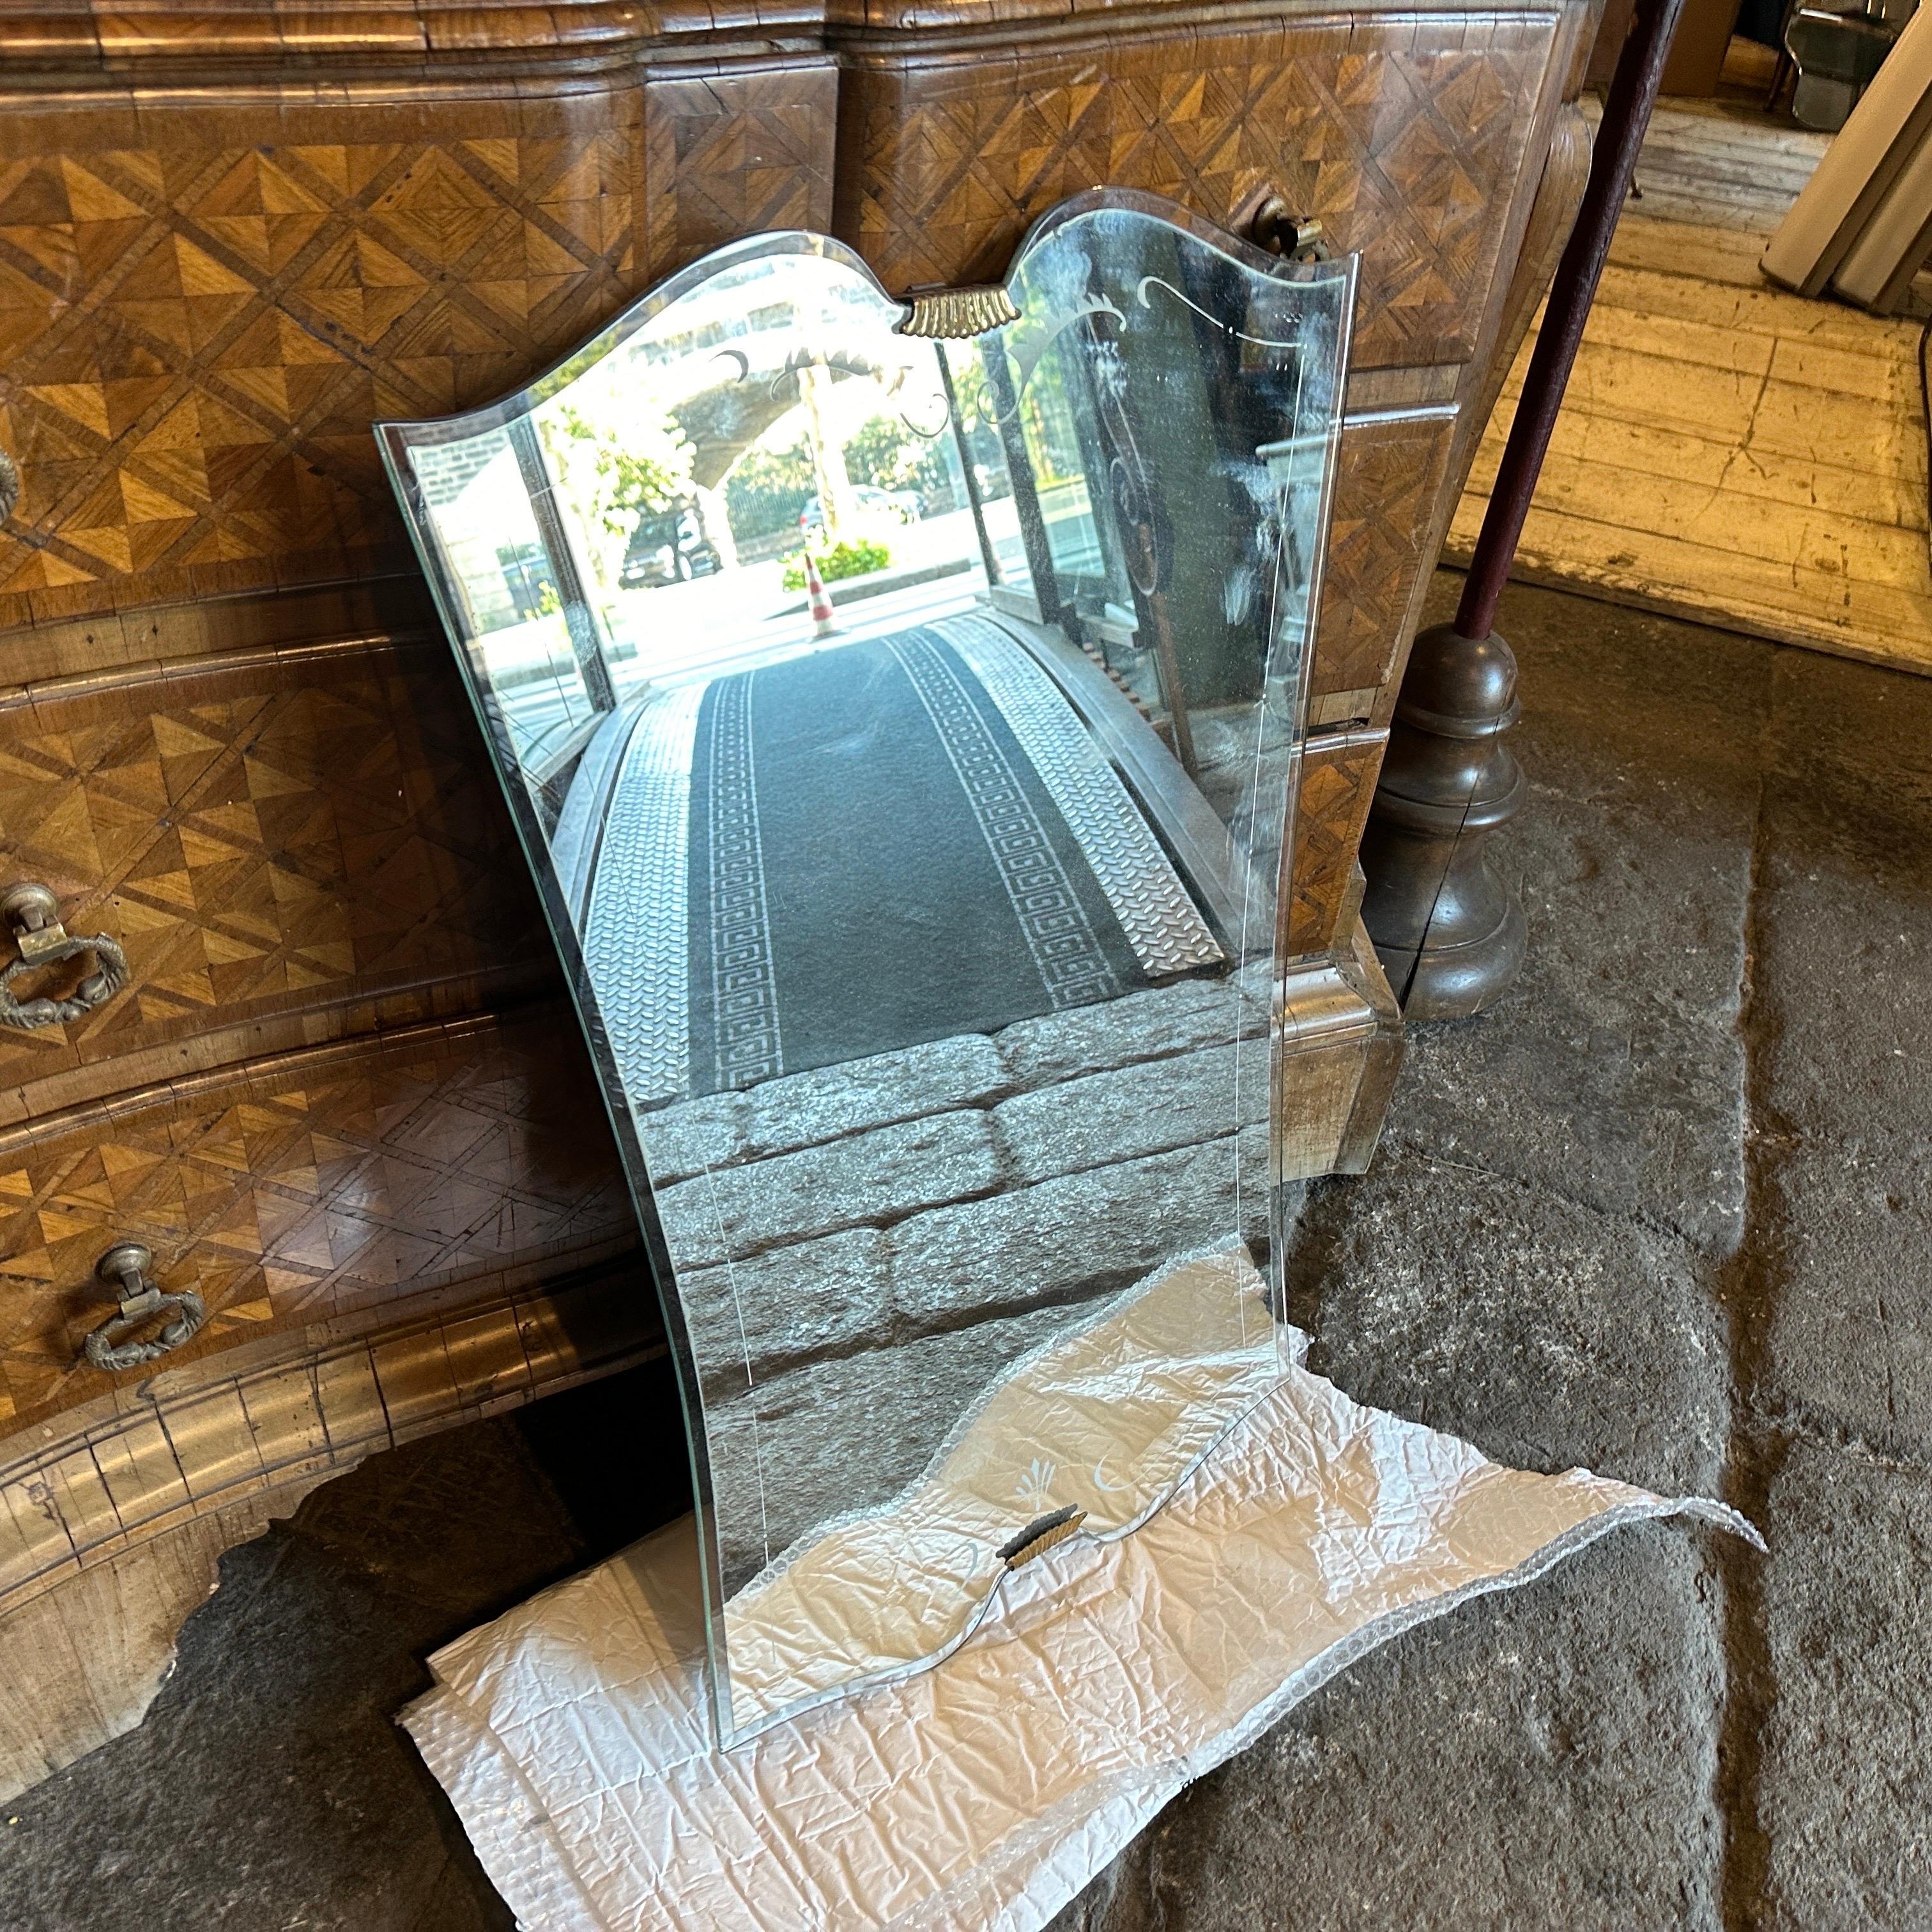 This Italian Wall Mirror exemplifies the opulence, sophistication, and geometric elegance characteristic of the Art Deco movement. It's in original condition with signs of use and age. It features a shield shape, a hallmark of Art Deco design, which